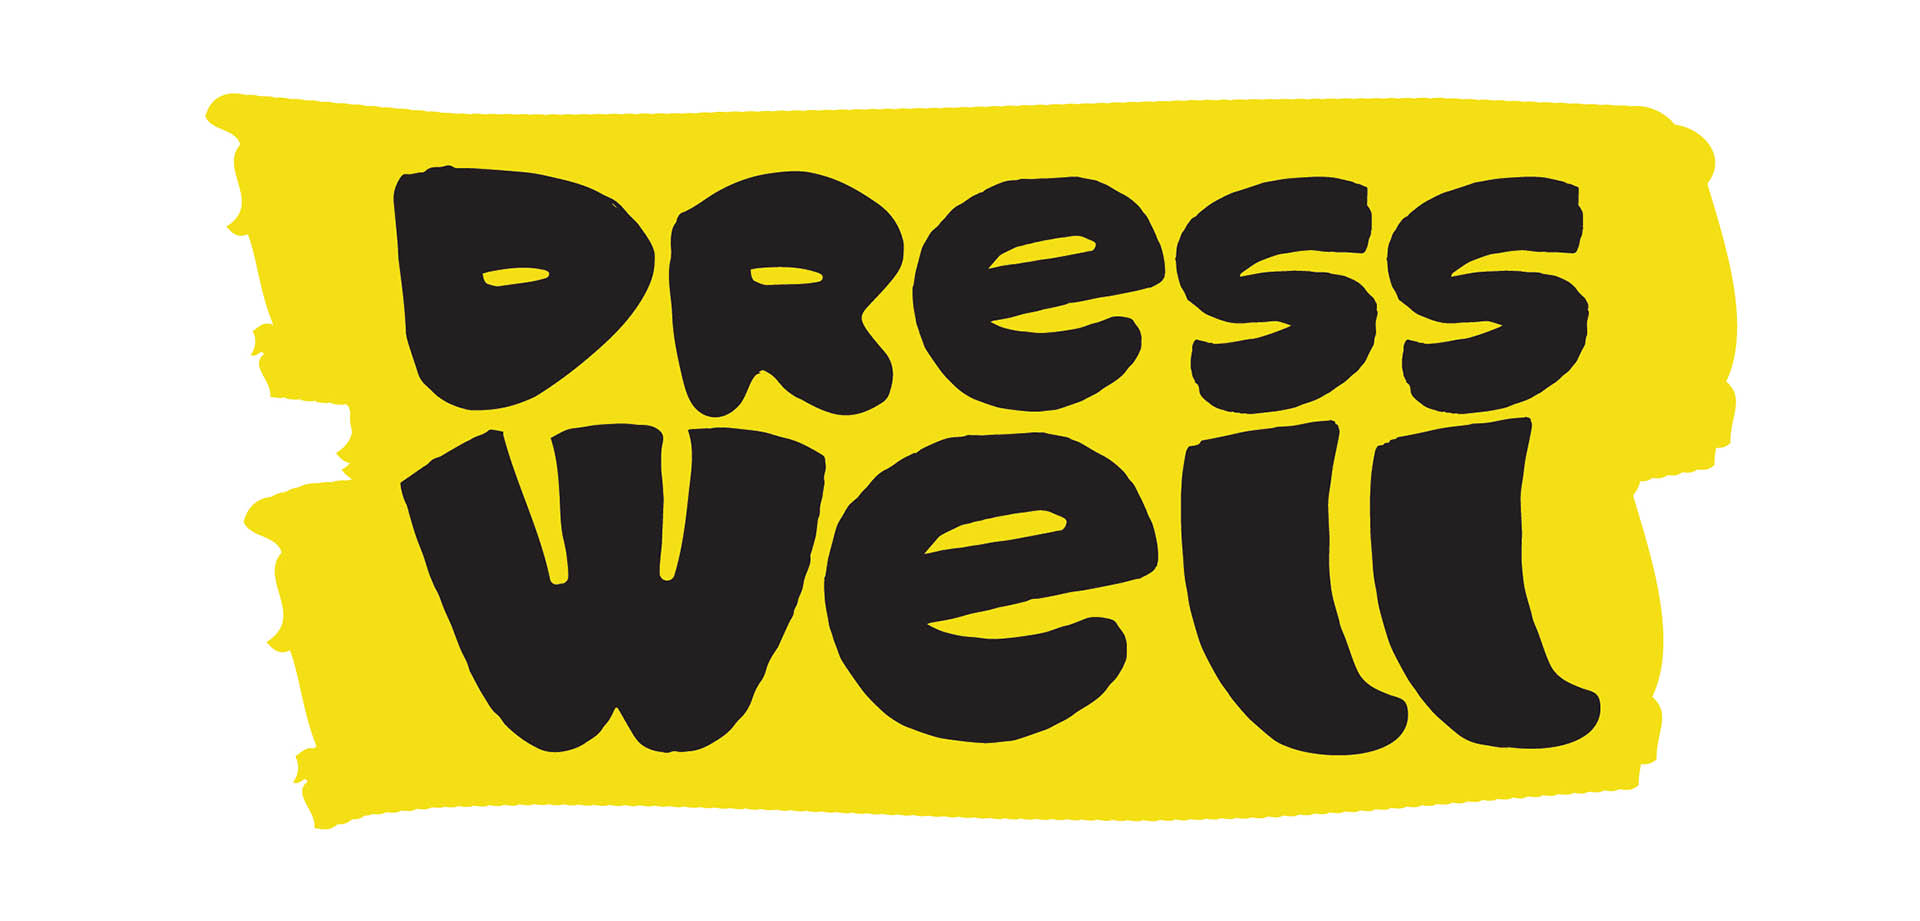 Visual identity for Dress Well